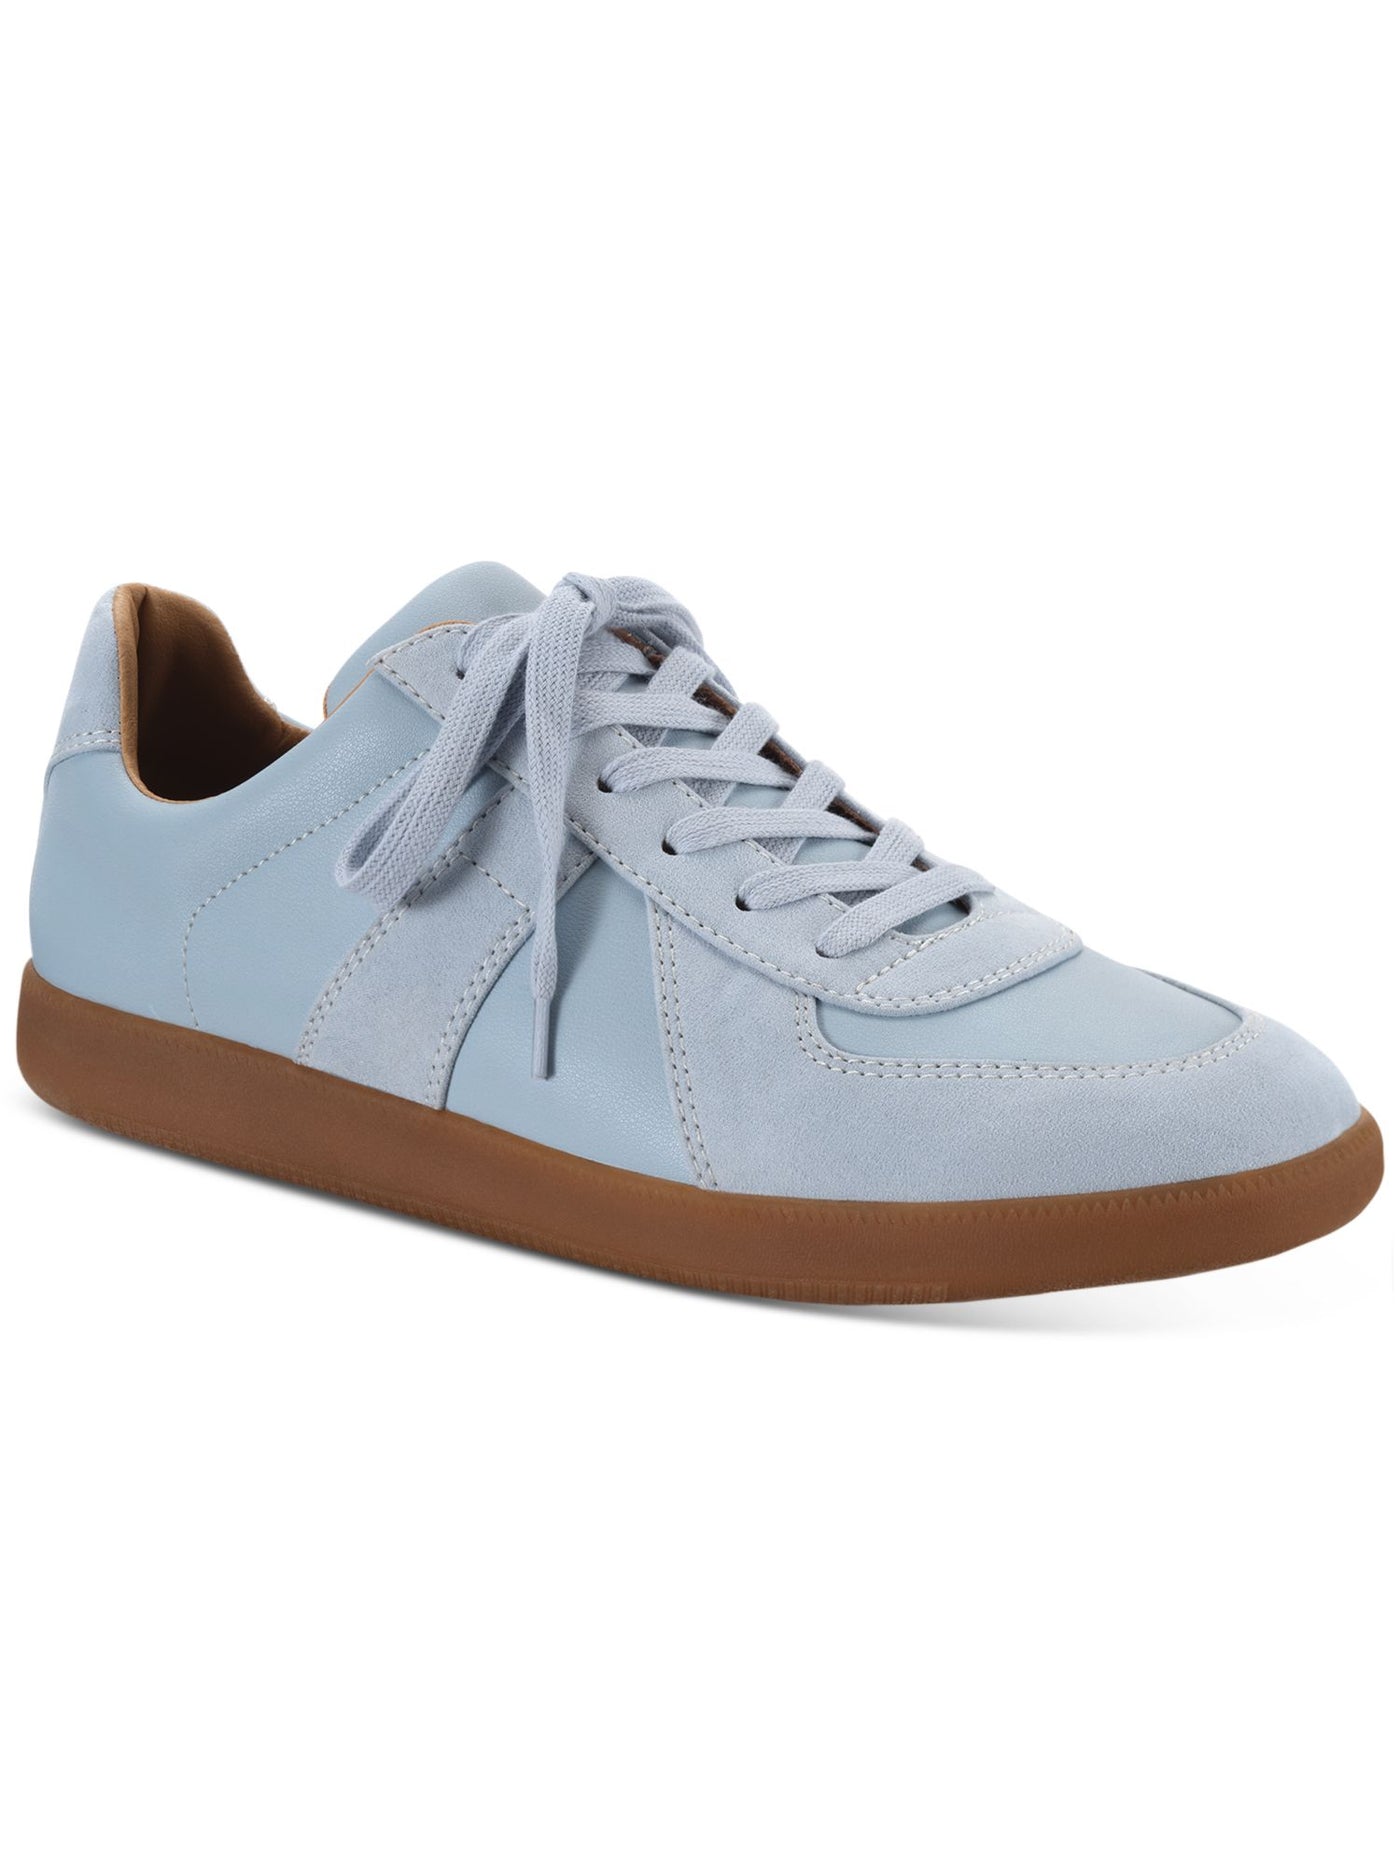 INC Mens Light Blue Padded Harlan Round Toe Platform Lace-Up Athletic Sneakers Shoes 11.5 M